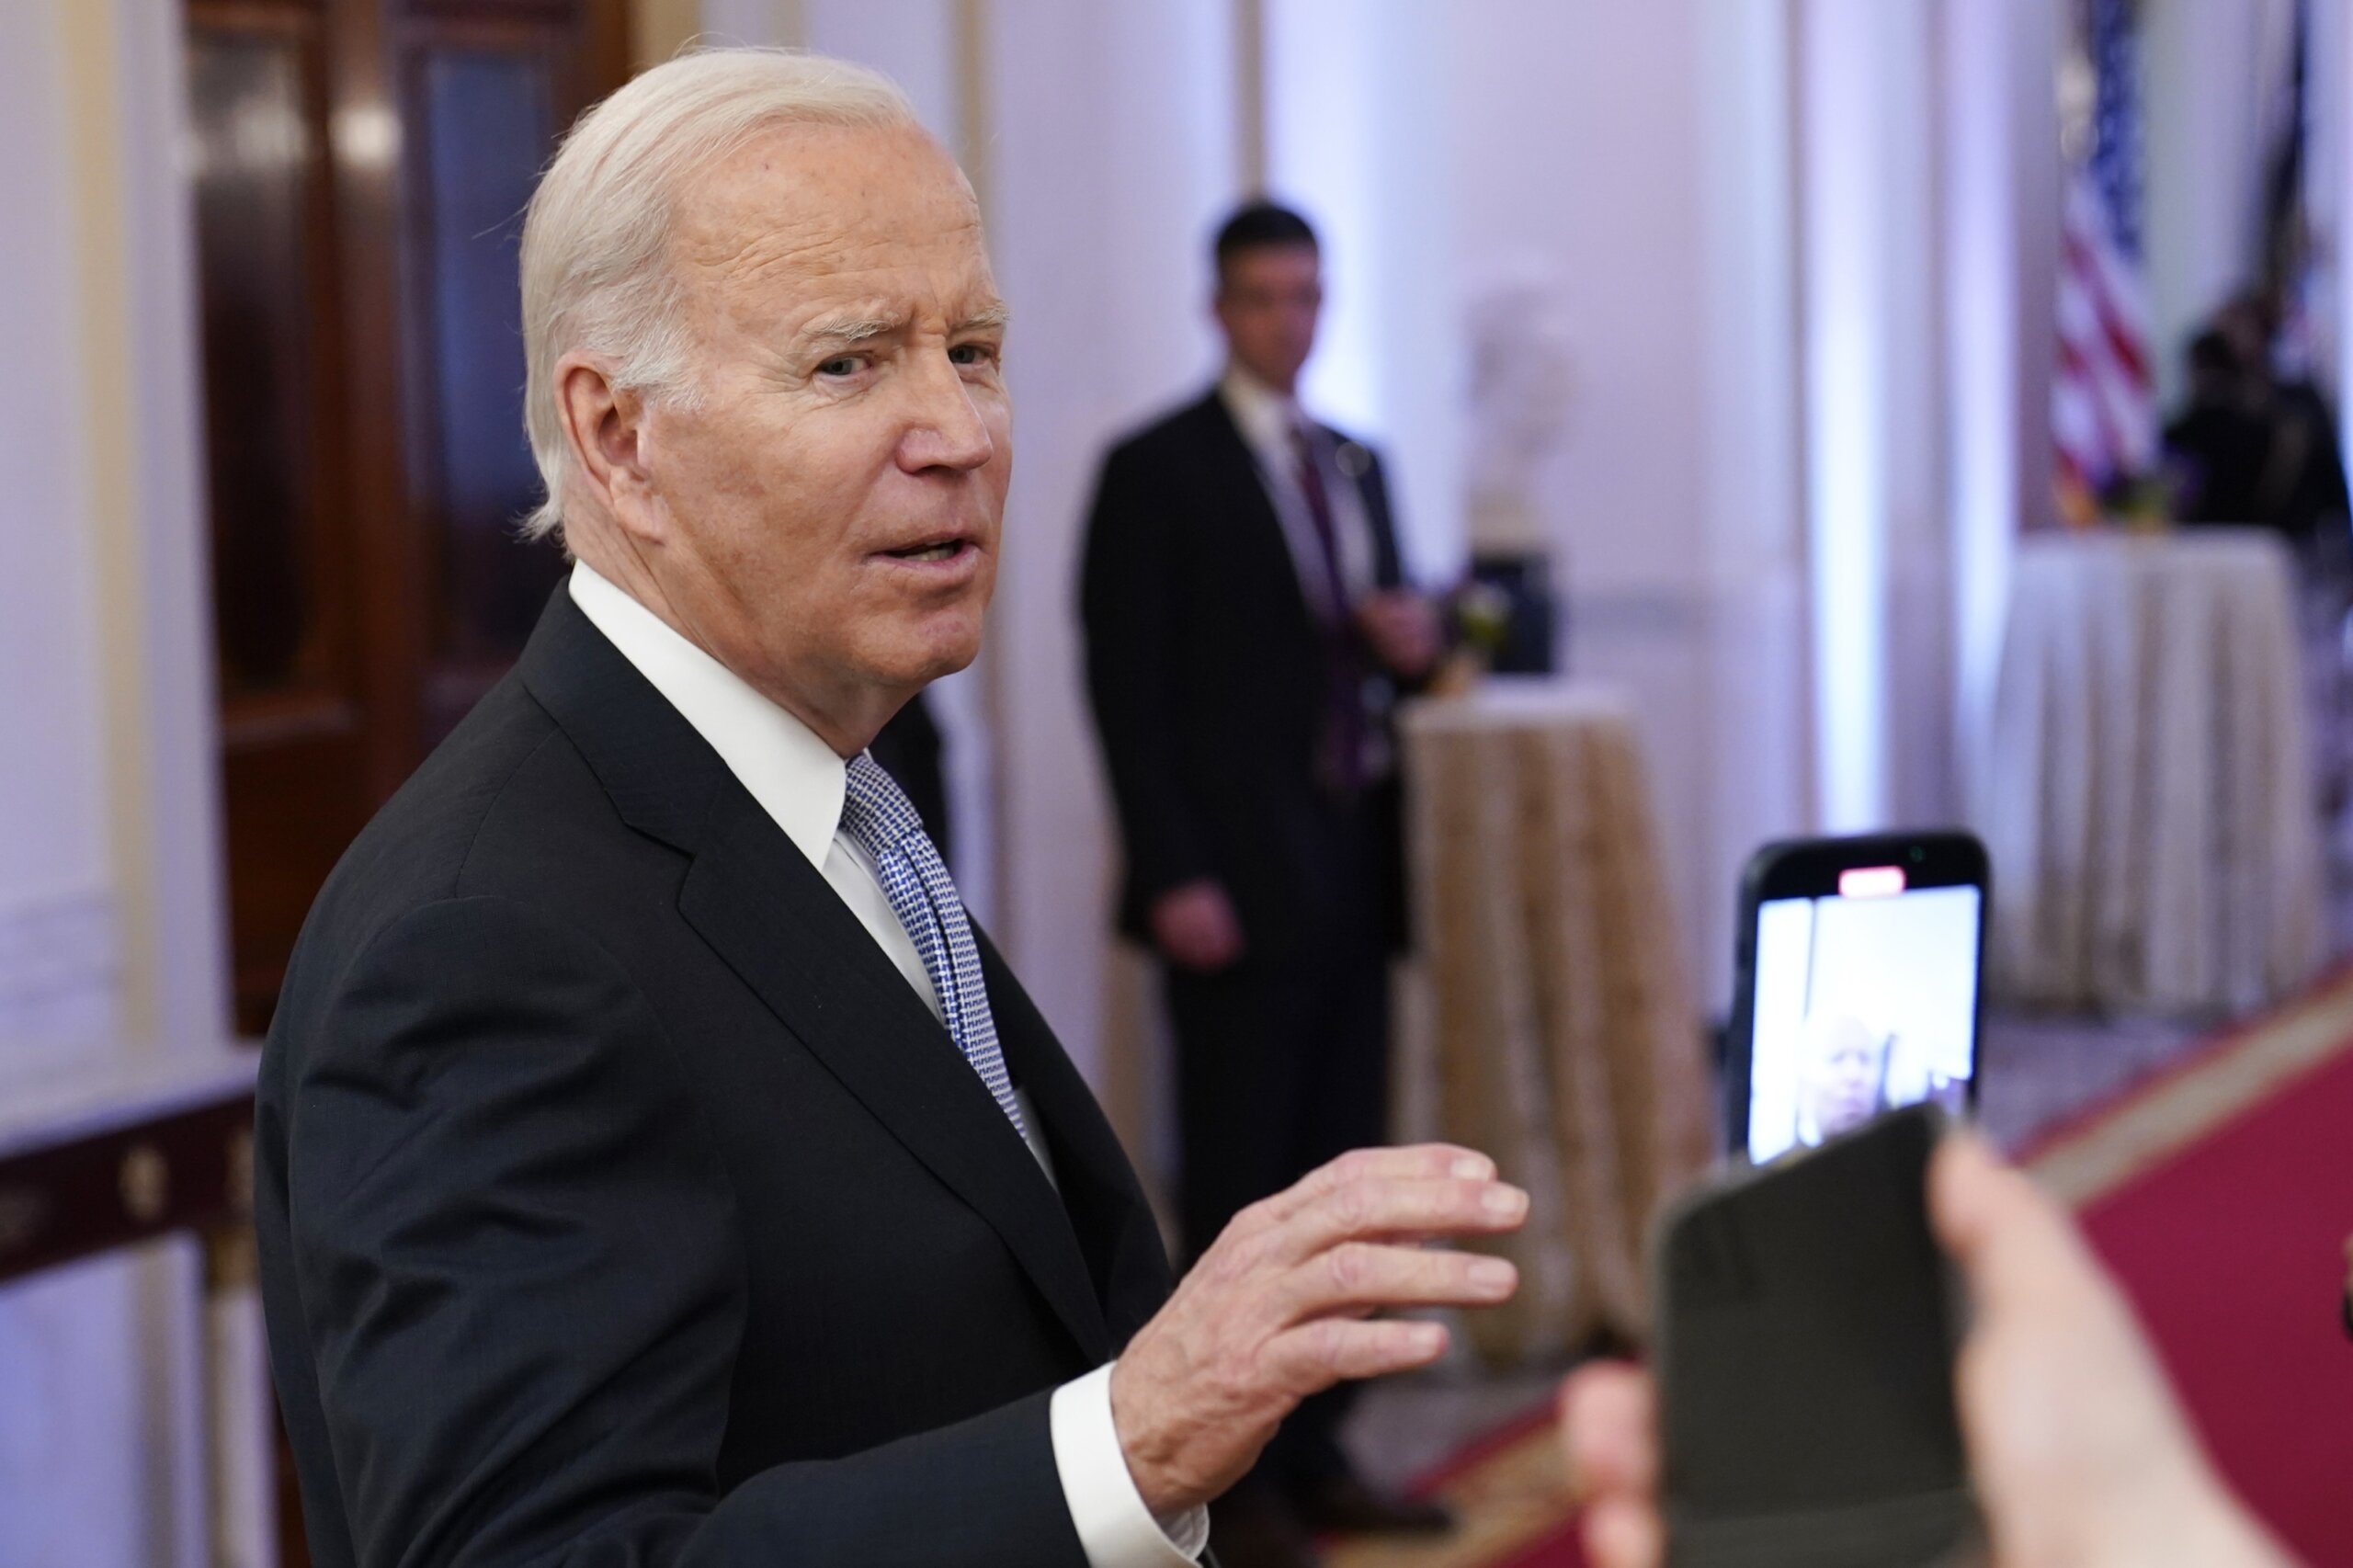 Dems: Biden should be ’embarrassed’ by classified docs case